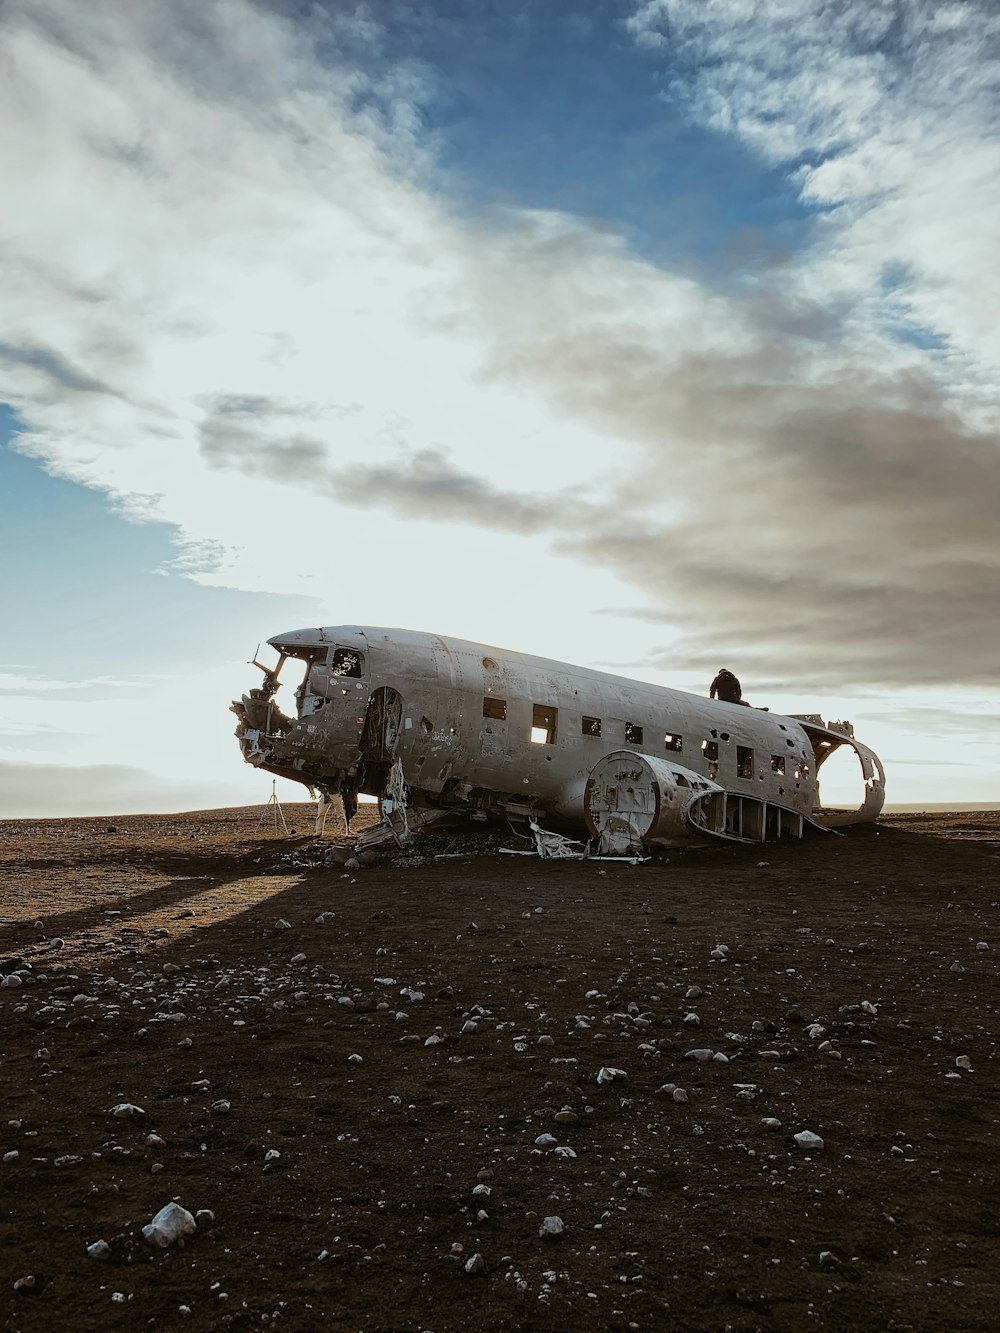 wrecked and abandoned airplane on dirt field